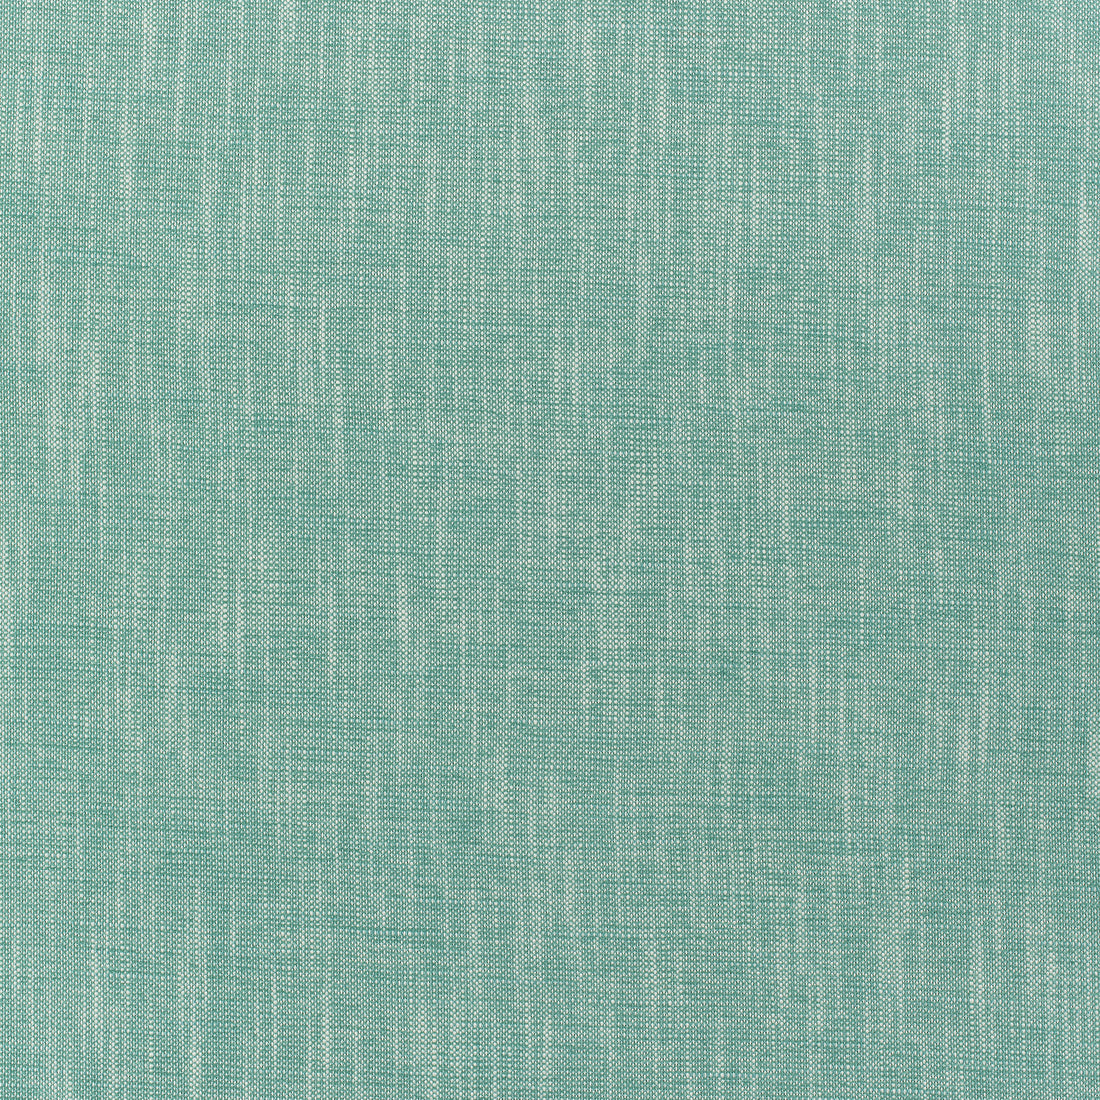 Bailey fabric in malachite color - pattern number W80498 - by Thibaut in the Mosaic collection